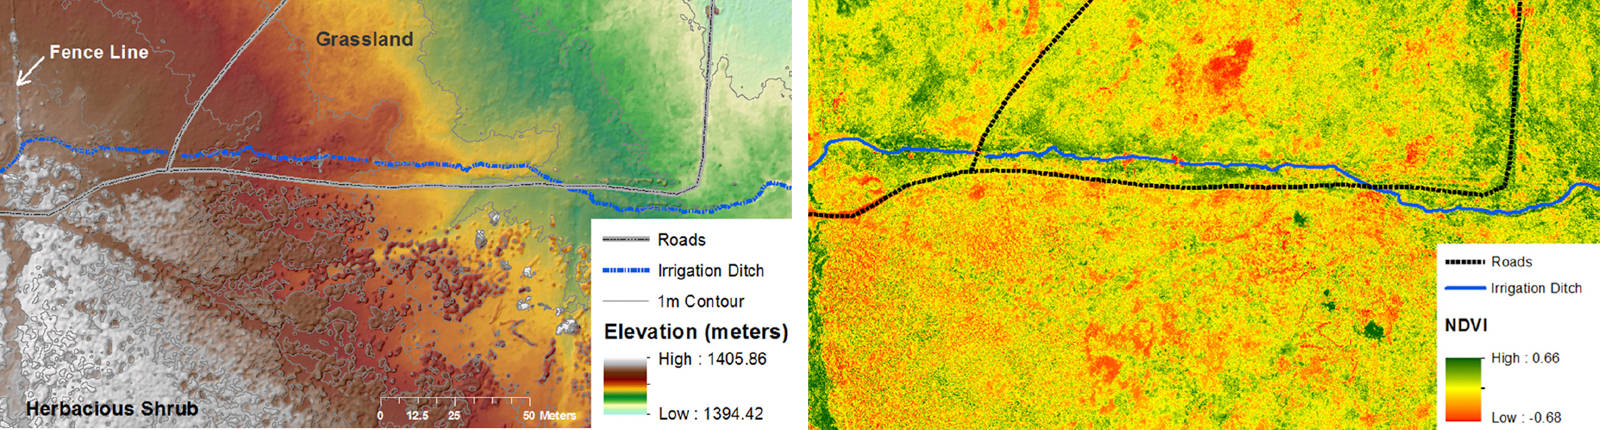 High-resolution imagery gathered from a drone can be used to assess rangeland condition and forage production. The above images show 12 acres of rangeland in Inyo County. The image at left is a digital surface model (DSM) with a resolution of 0.8 inches, generated from digital photographs. Fine resolution DSMs like this can be used over time to monitor vegetation growth, and hence forage production. The image at right, captured by a Parrot Sequoia multispectral camera, shows the normalized difference vegetation index (NDVI) at a resolution of 1.45 inches. The NDVI is a measure of the relative absorbance of near-infrared and visible light and can be used to distinguish green vegetation (shown in the image as green) from stressed, dying or dead vegetation (shown as yellow to red in the image).